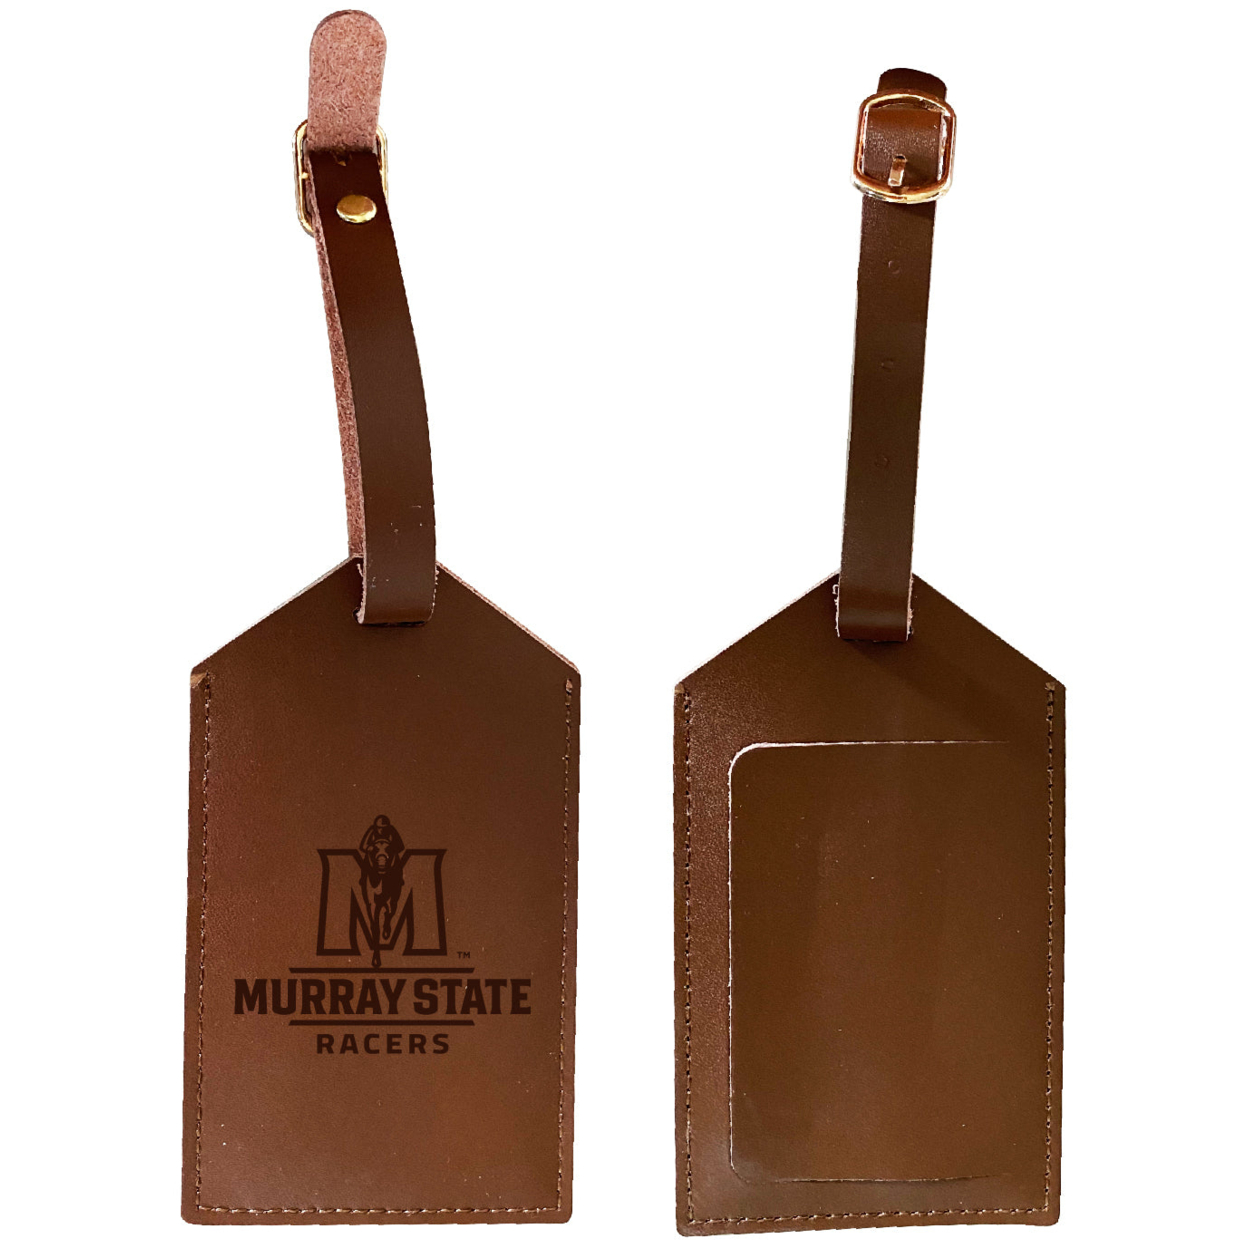 Murray State University Leather Luggage Tag Engraved